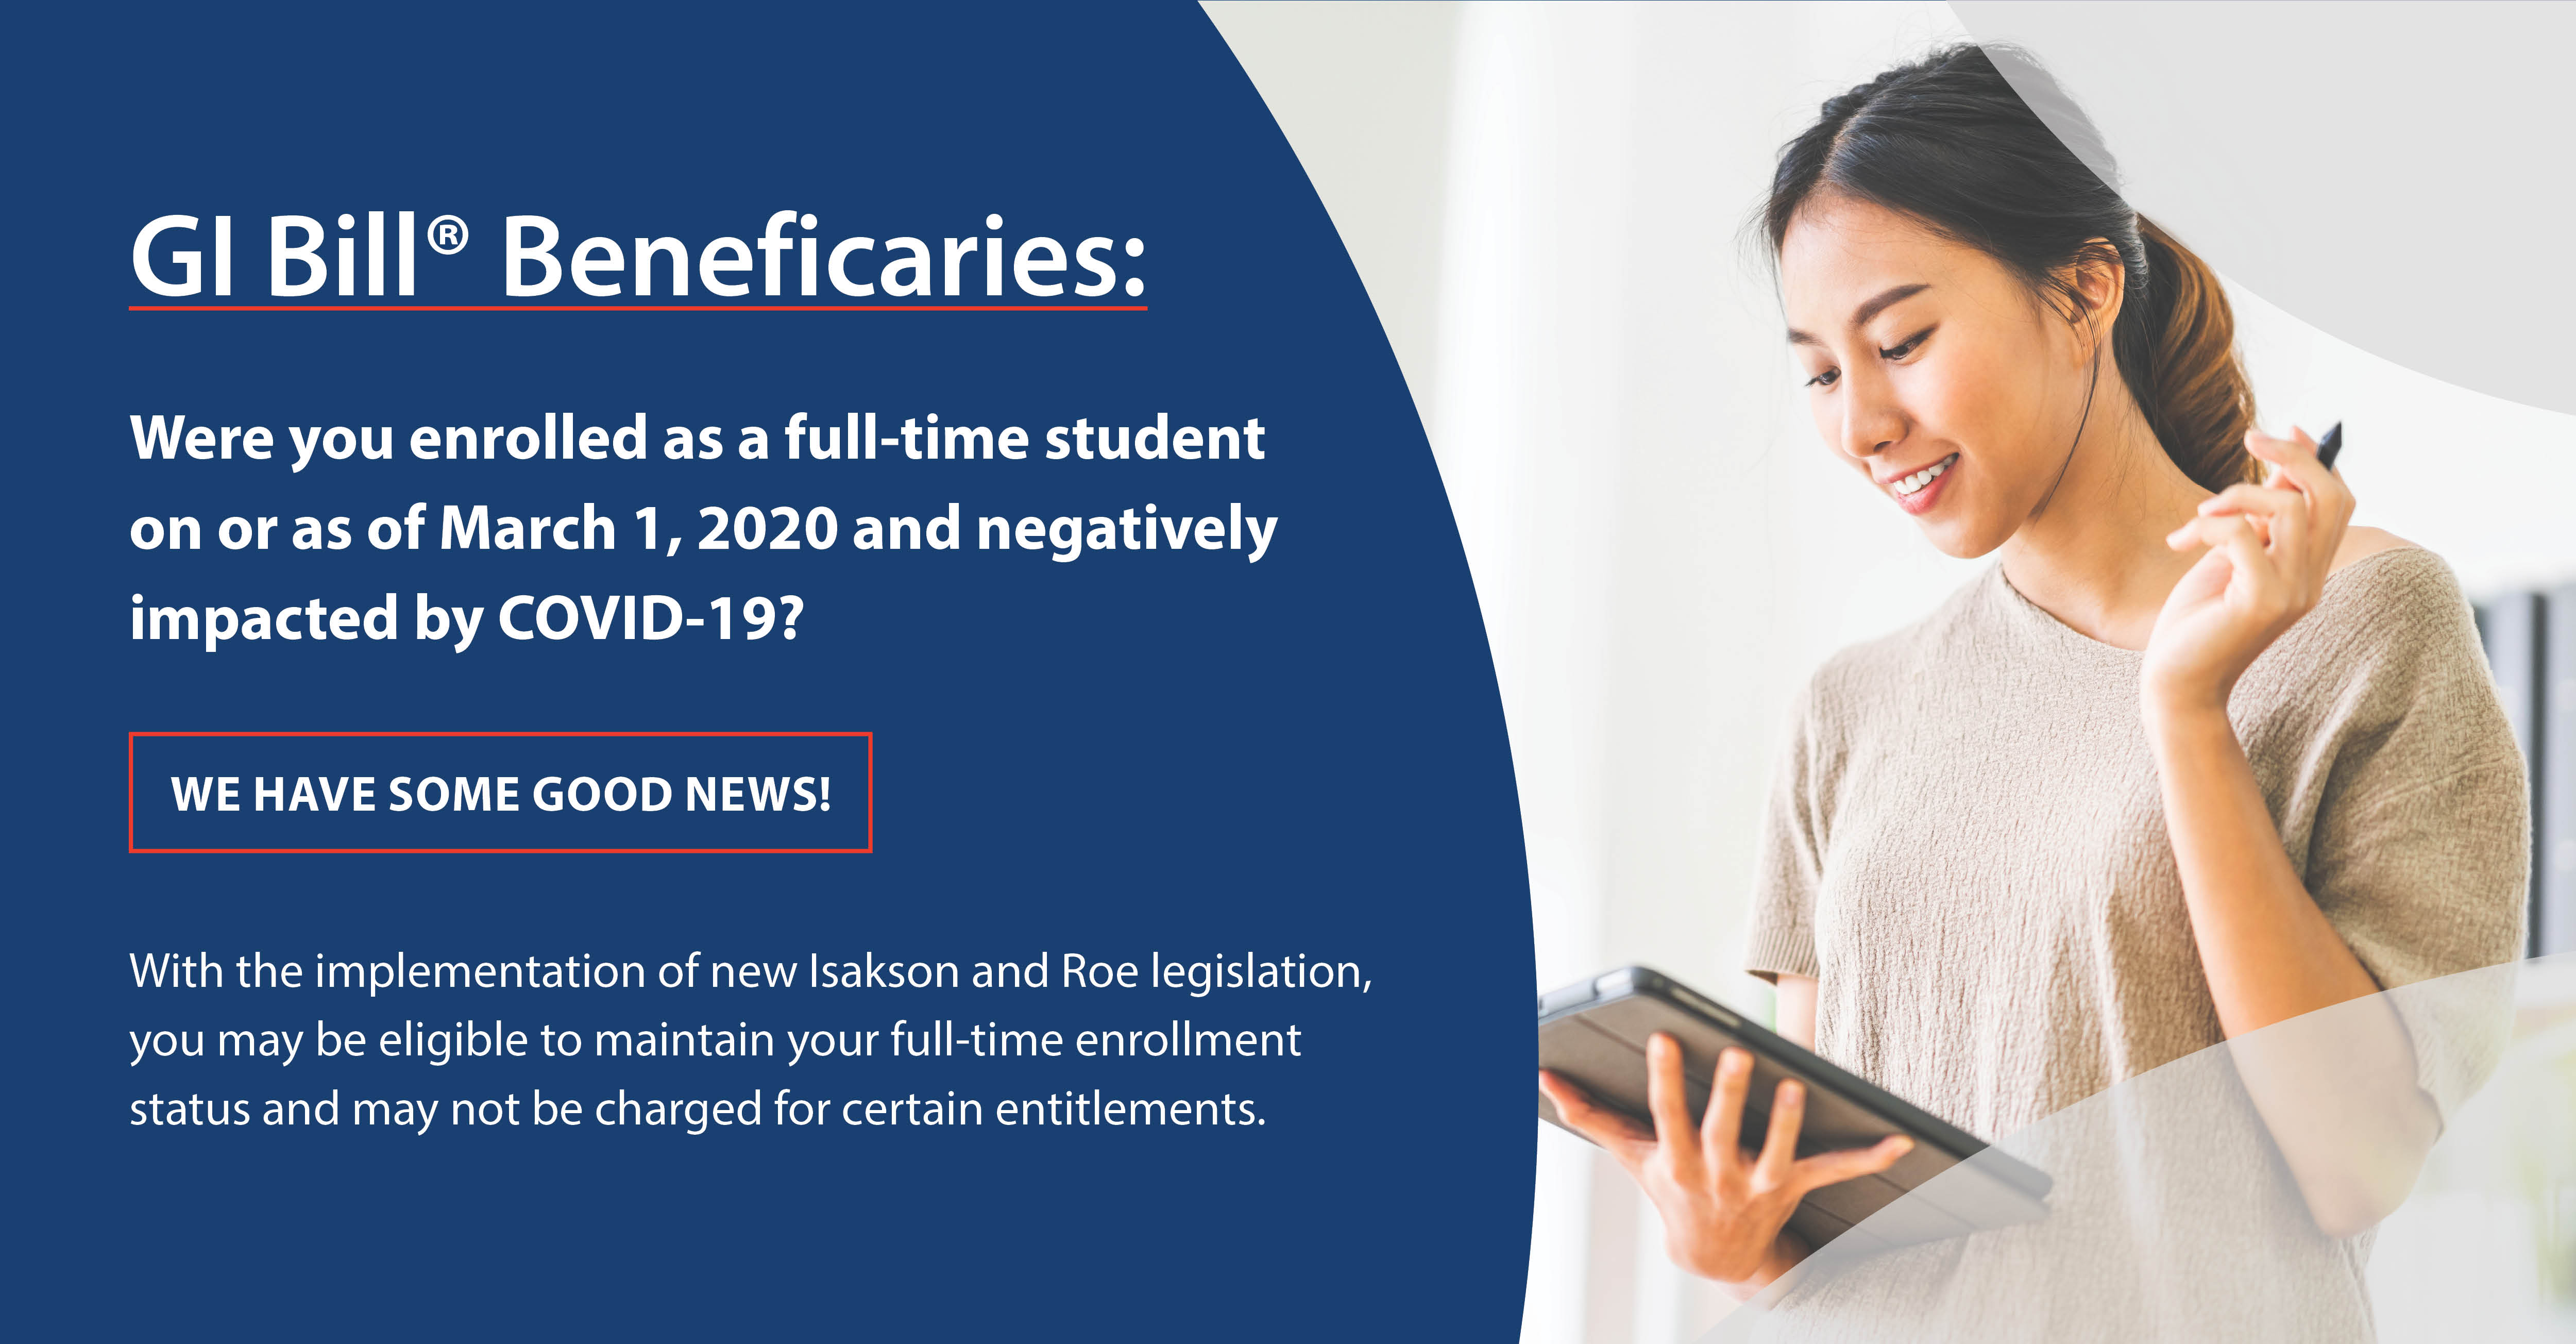 image - young woman holding a tablet.  Content - Were you enrolled as a full-time student on or as of March 1, 2020 and negatively impacted by COVID-19? We have some good news! With the implementation of new Isakson and Roe legislation, you may be eligible to maintain your full-time enrollment status and may not be charged for certain entitlements.